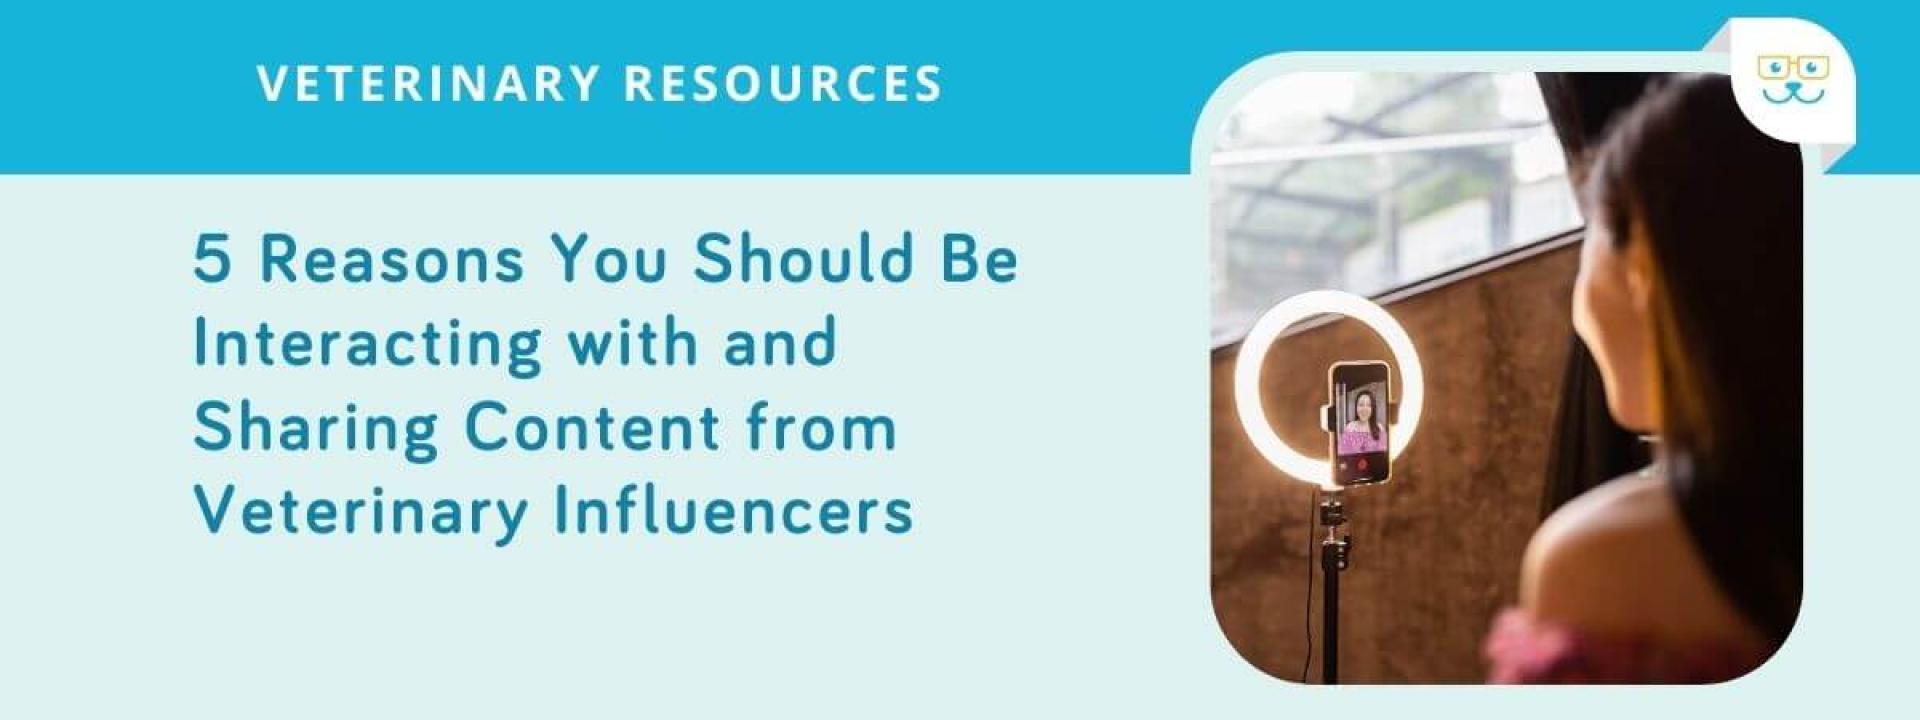 5 Reasons You Should Be Interacting with and Sharing Content from Veterinary Influencers